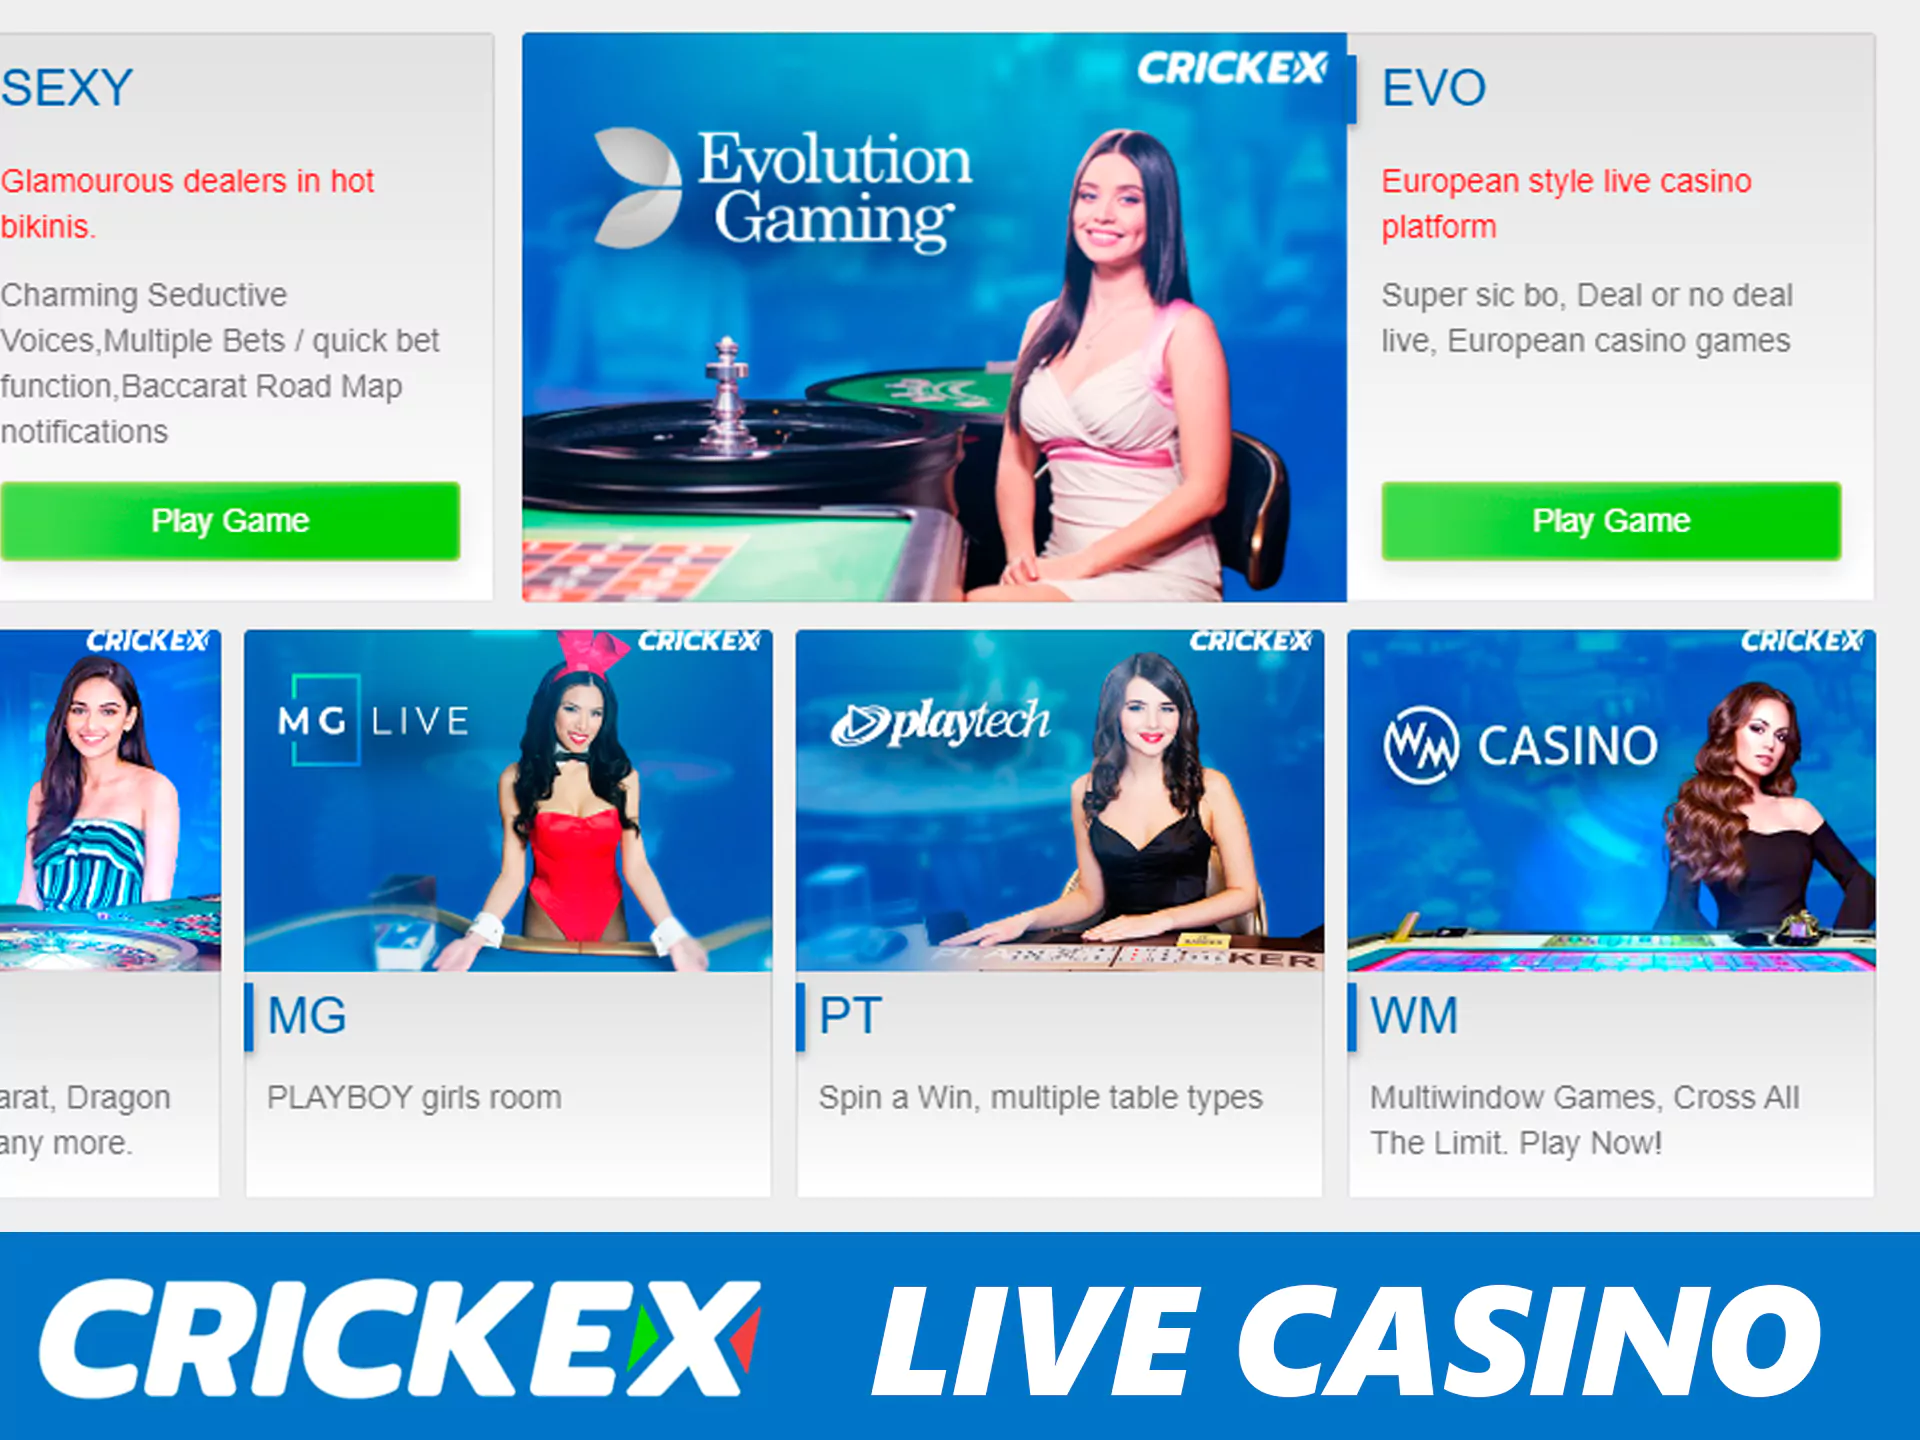 Live dealer games are available on the official Crickex website.